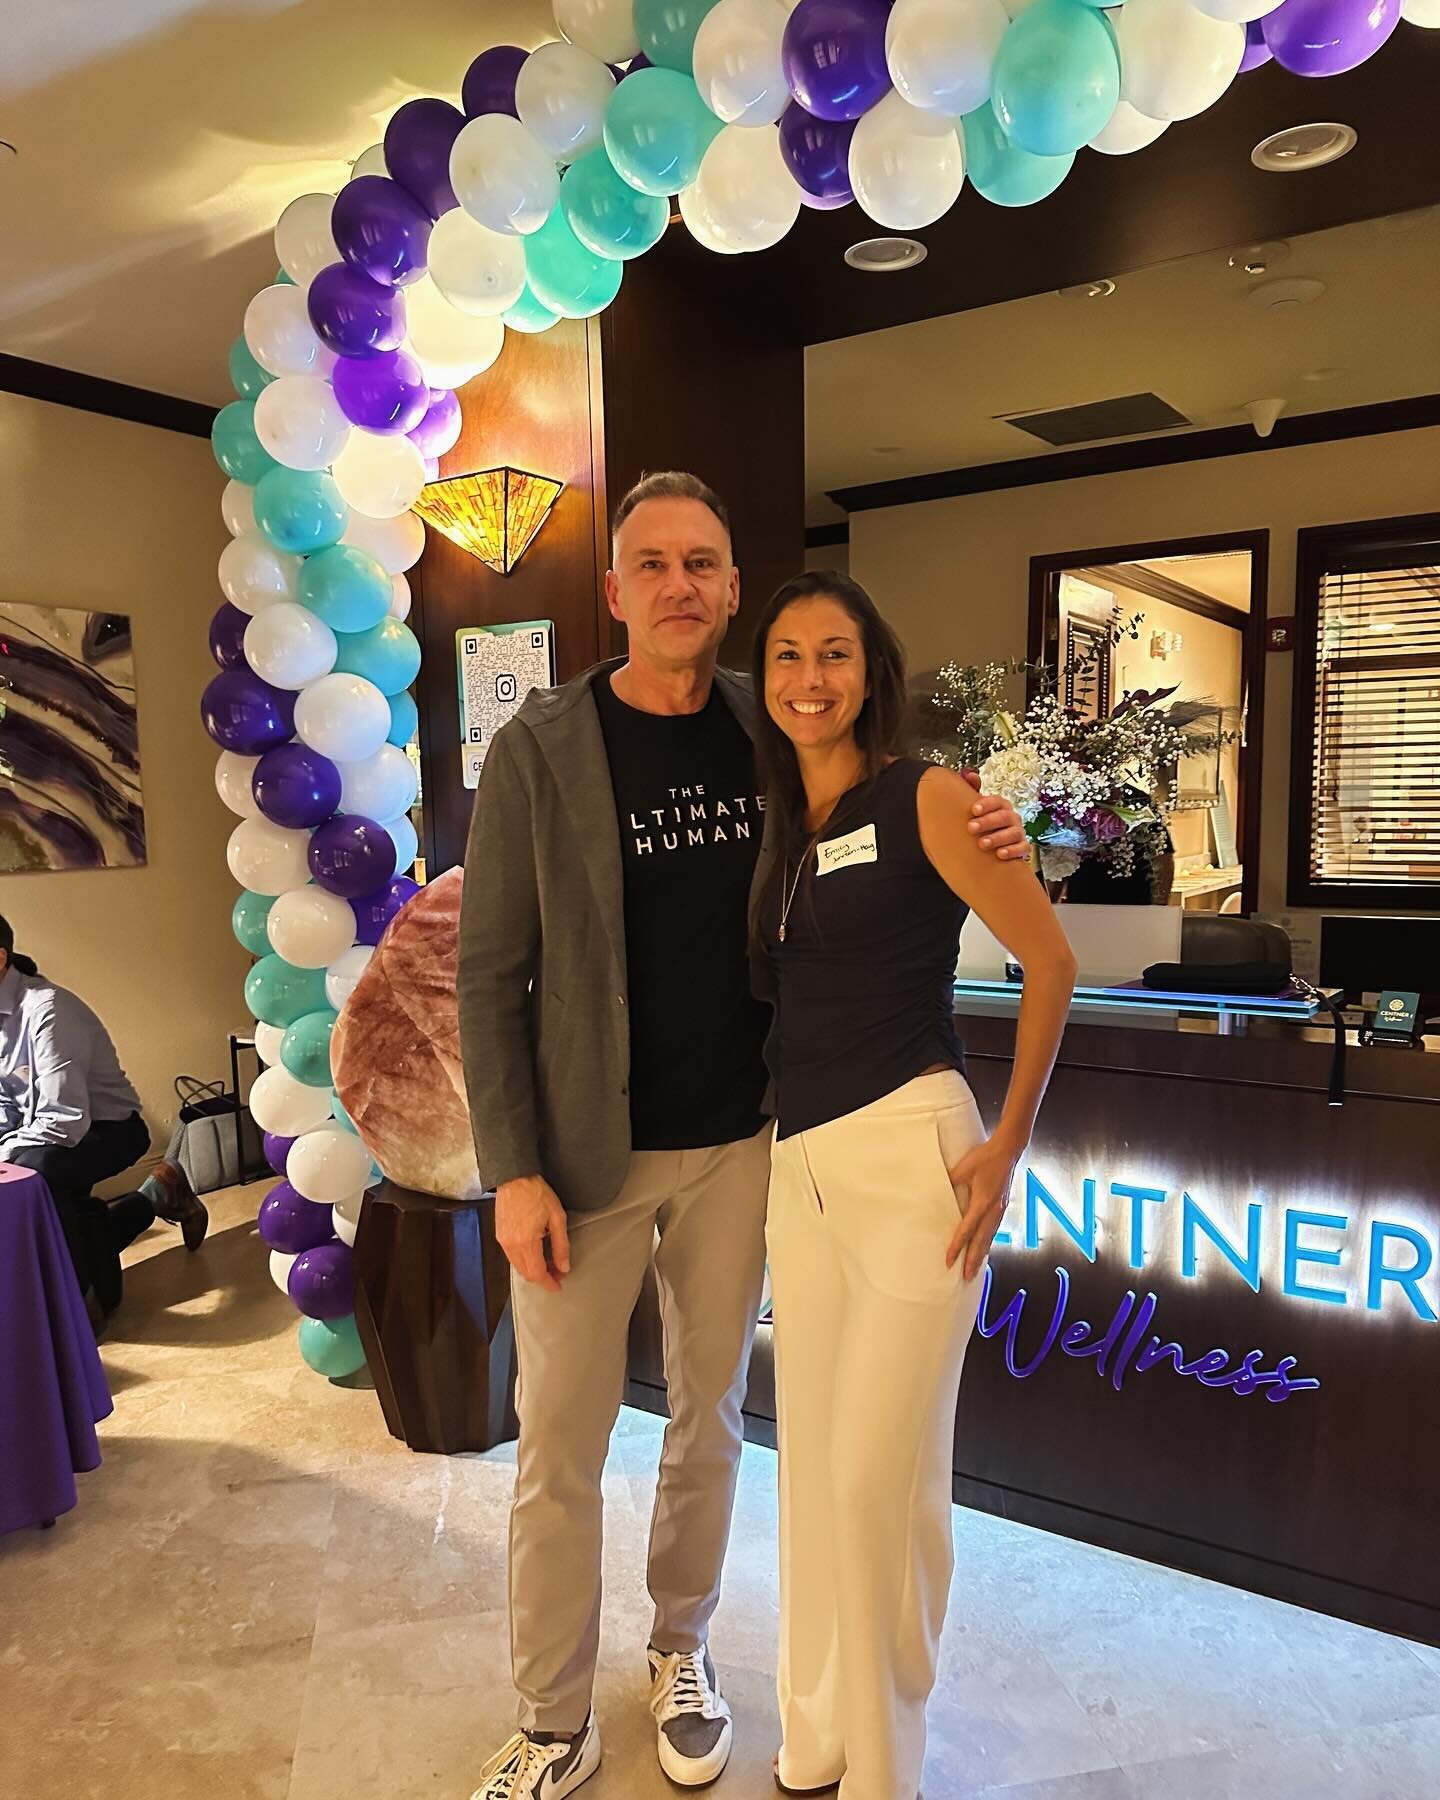 💫 A couple of weeks ago, I was honored to attend the grand opening of the Centner Wellness Center in Miami &ndash; a true milestone for our community&rsquo;s health and wellness landscape.  The center&rsquo;s holistic approach to wellness, integrati